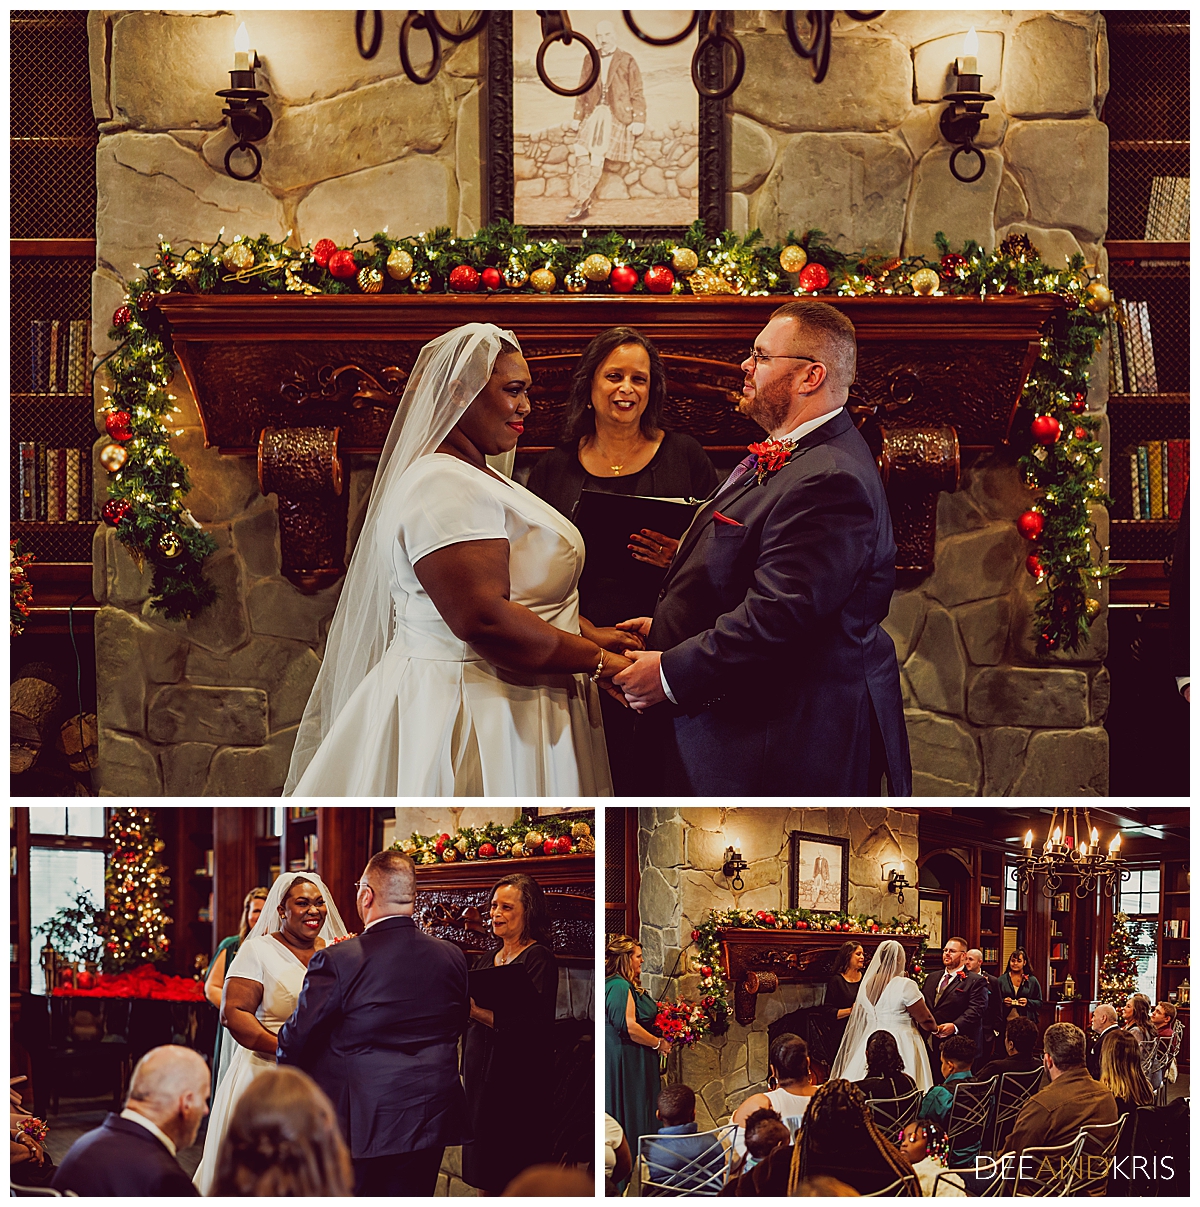 Three images: Top image of bride and groom holding hands facing each other as officiant speaks in front of holiday ecorated fireplace mantle. Bottom left image of bride smiling at groom. Bottom right image of groom smiling at bride.